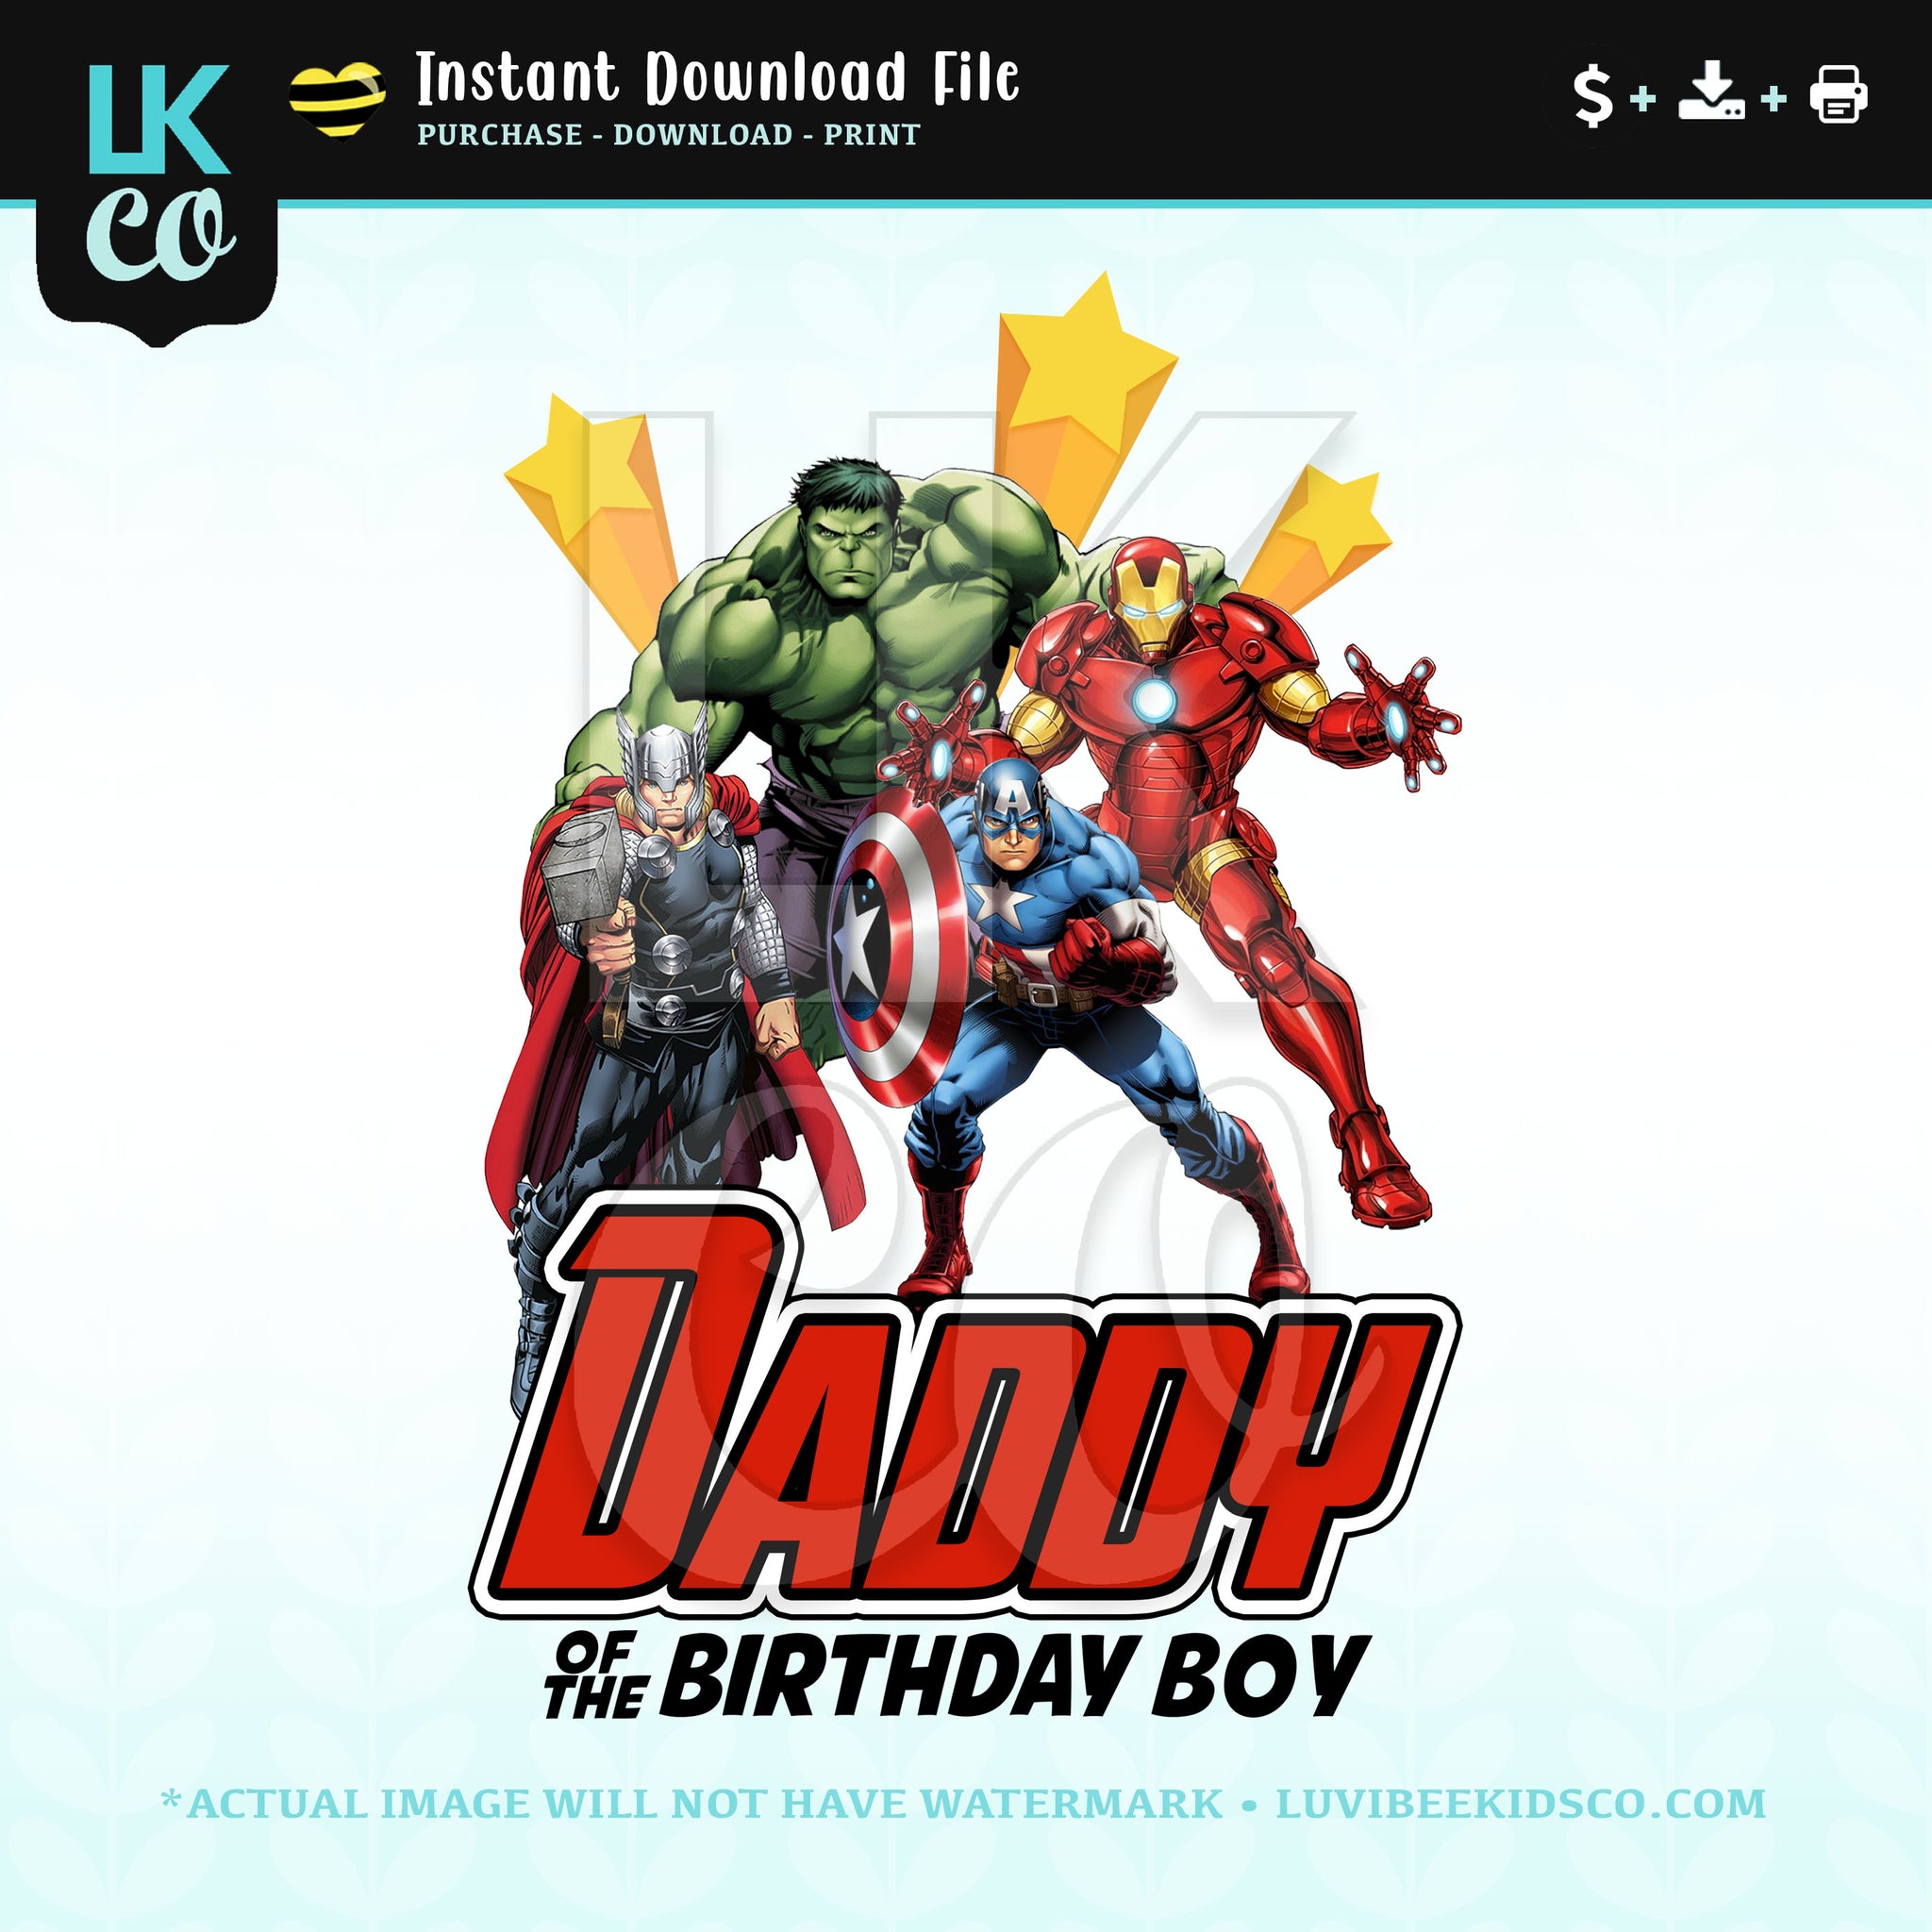 Avengers Digital File [Instant Download] for Birthday and Events - Daddy of the Birthday Boy